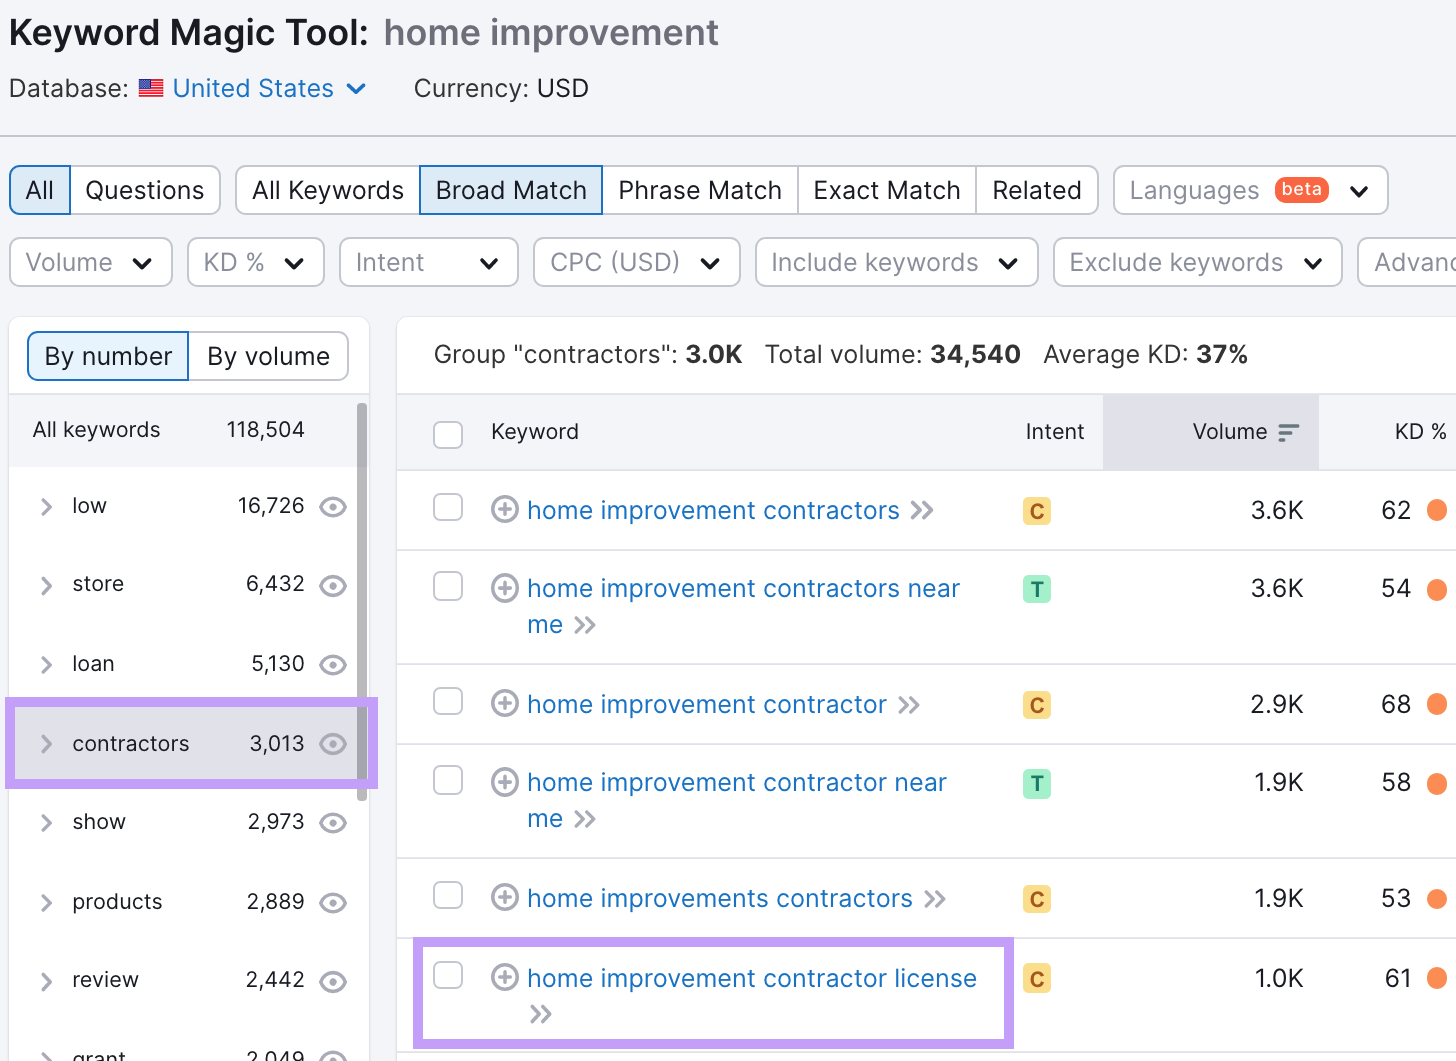 Keyword magic tool results for home improvement with the keyword home improvement contracted license highlighted.